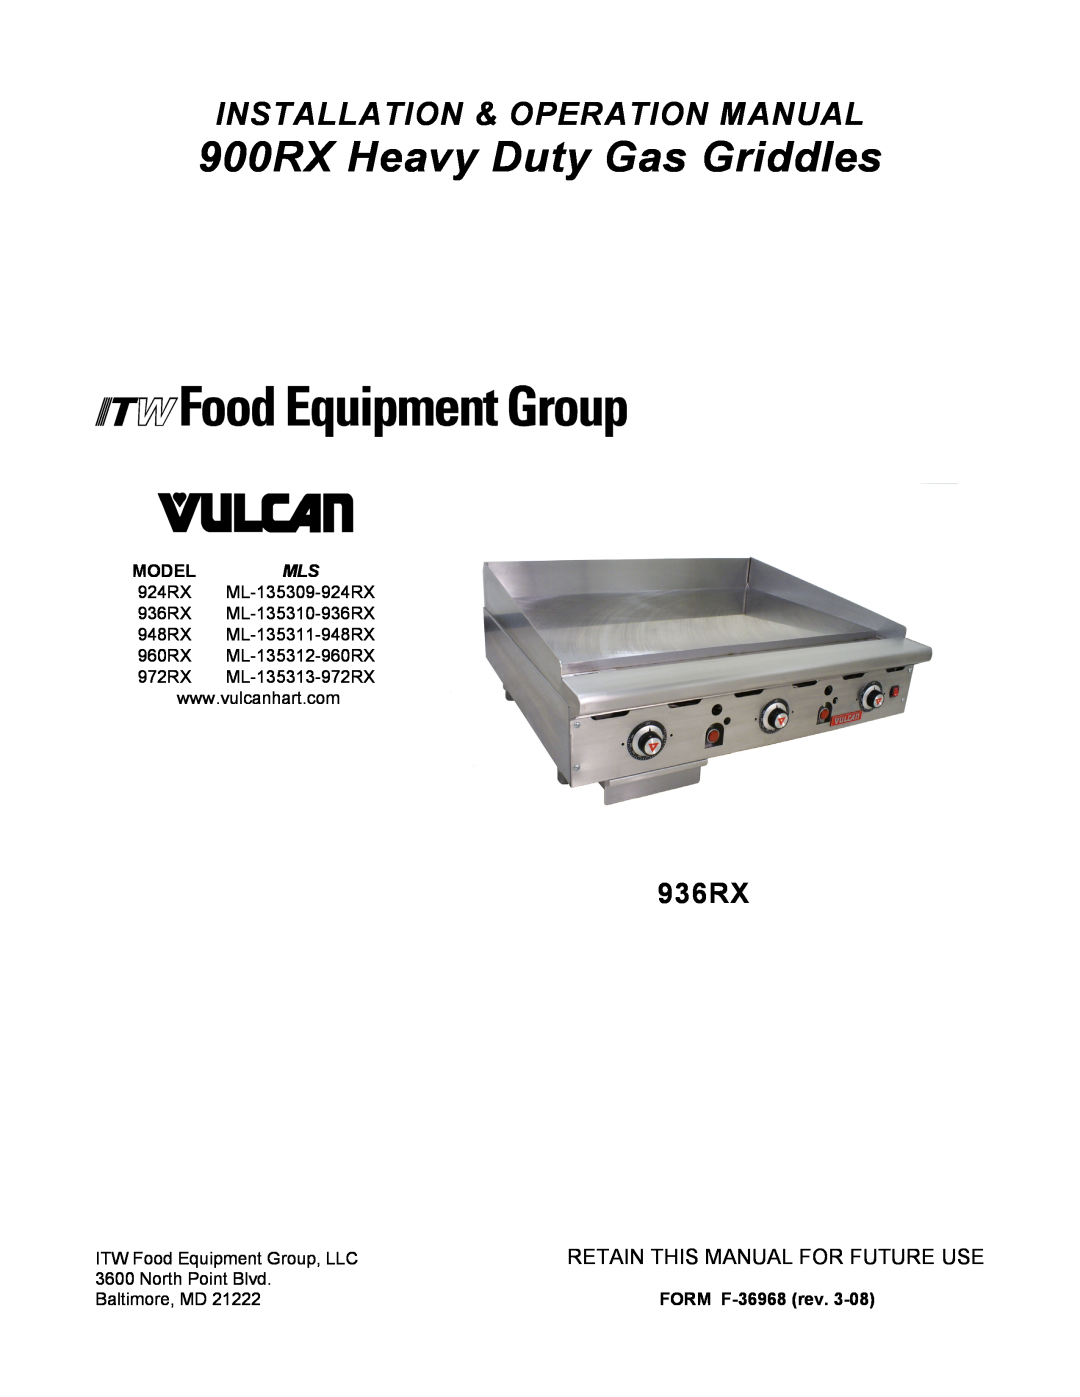 Vulcan-Hart ML-135309-924RX operation manual Retain This Manual For Future Use, 900RX Heavy Duty Gas Griddles, 936RX 